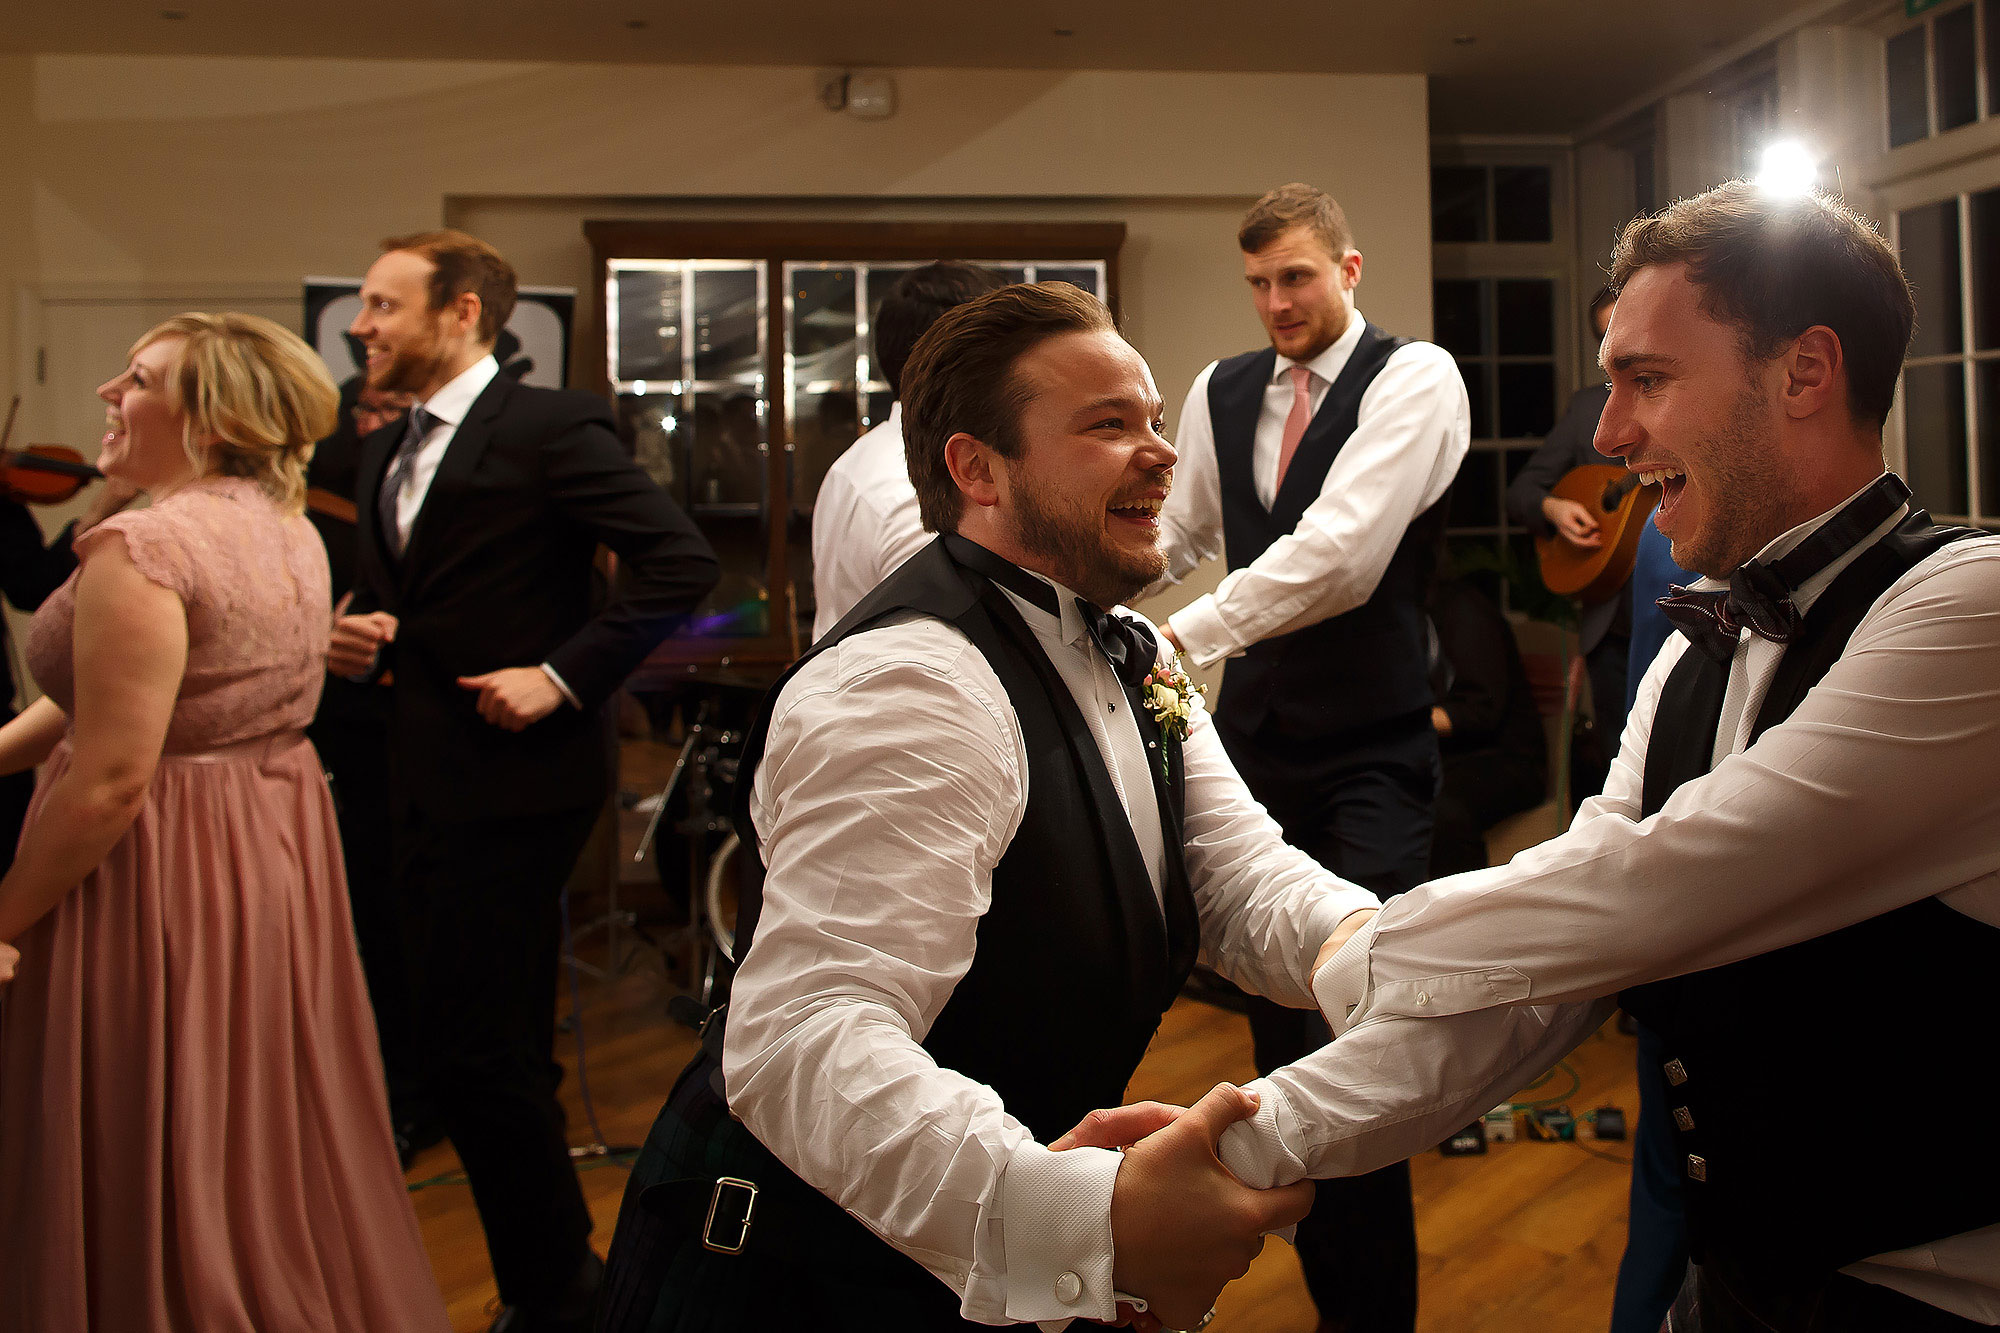 Wedding guests enjoying the ceilidh dancing | Mitton Hall wedding photographs by Toni Darcy Photography